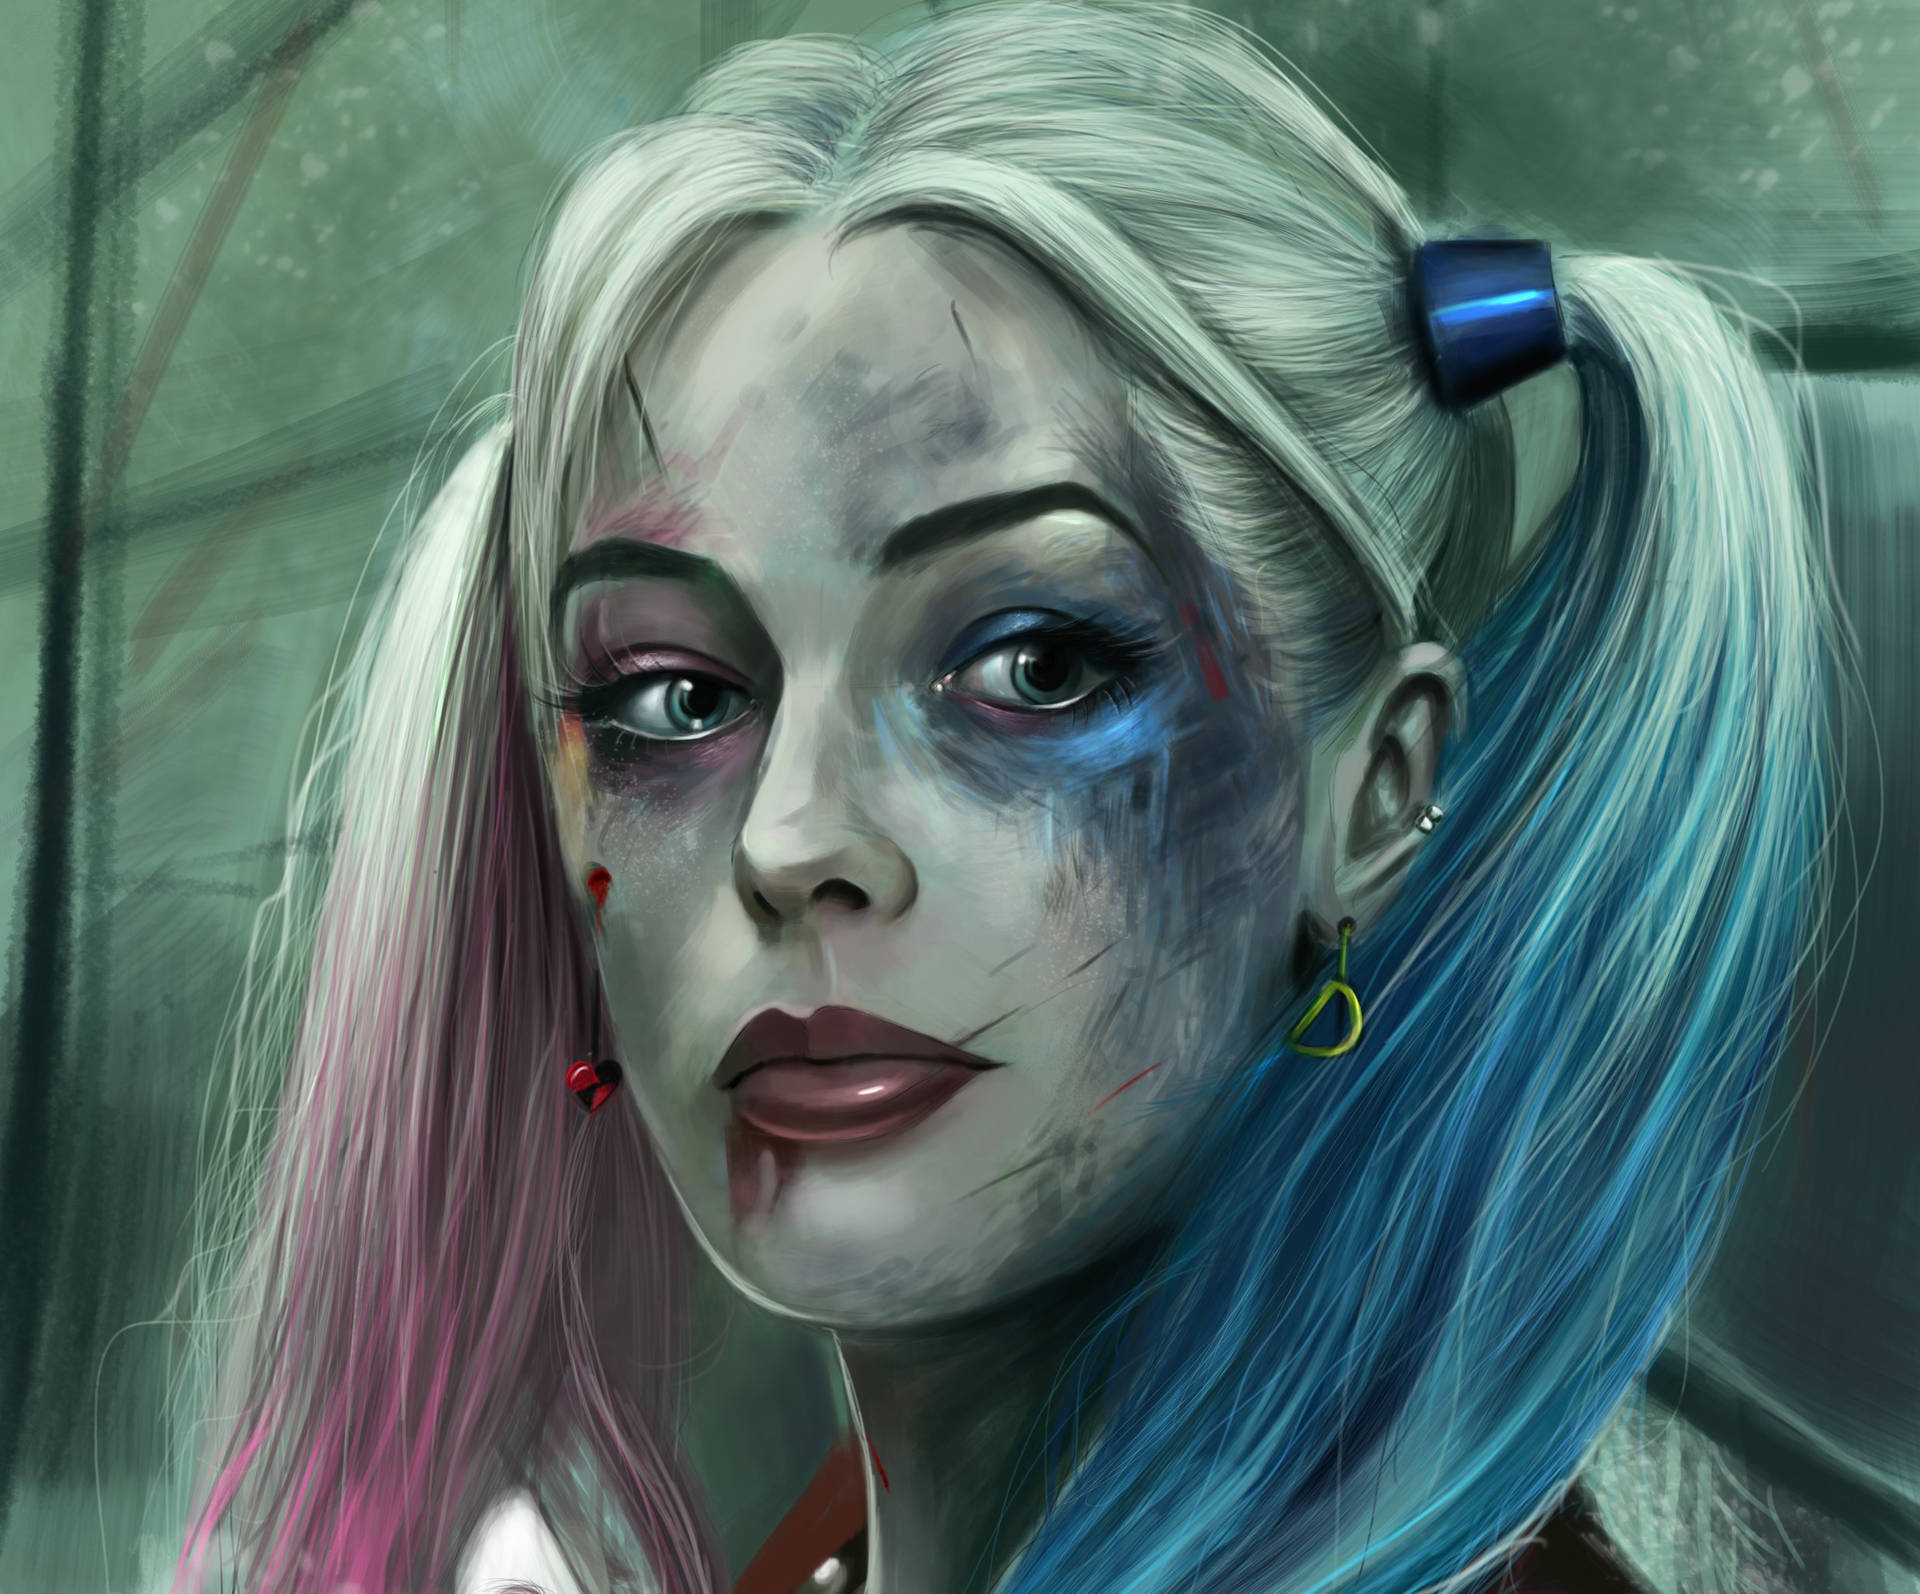 Harley Quinn: Sweetest Troublemaker on The Suicide Squad Wallpaper